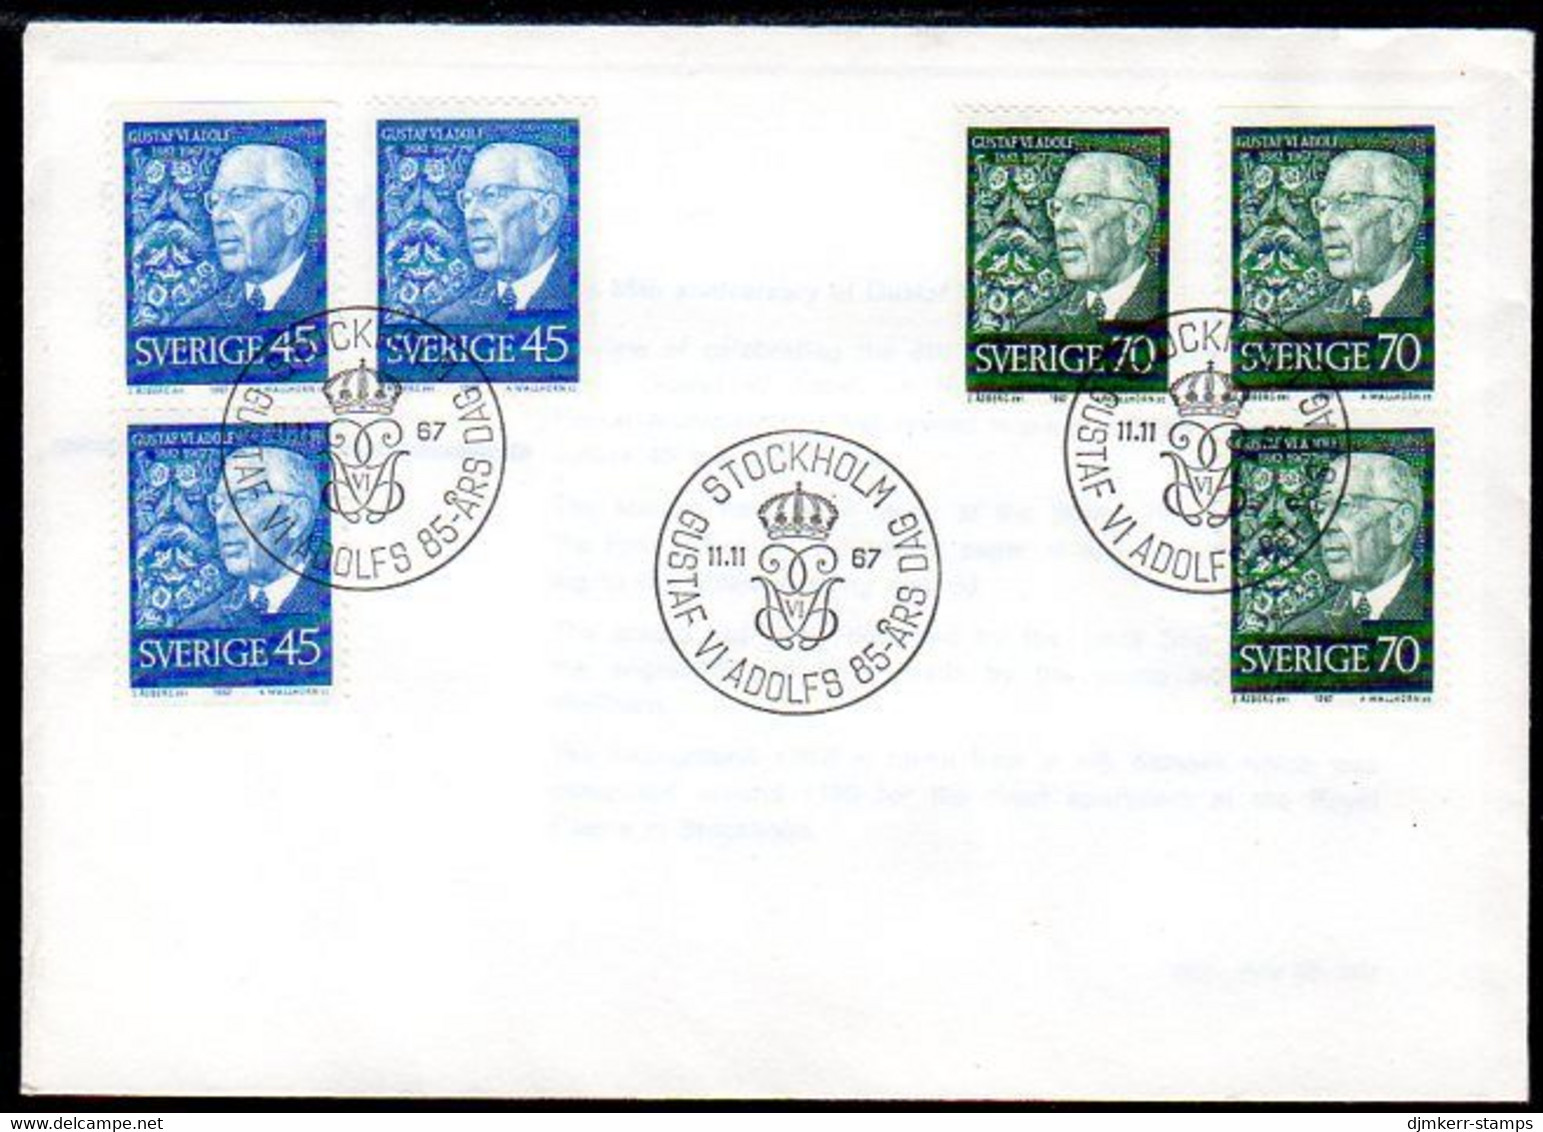 SWEDEN 1967 King's 85th Birthday FDC.  Michel 594-95 - FDC